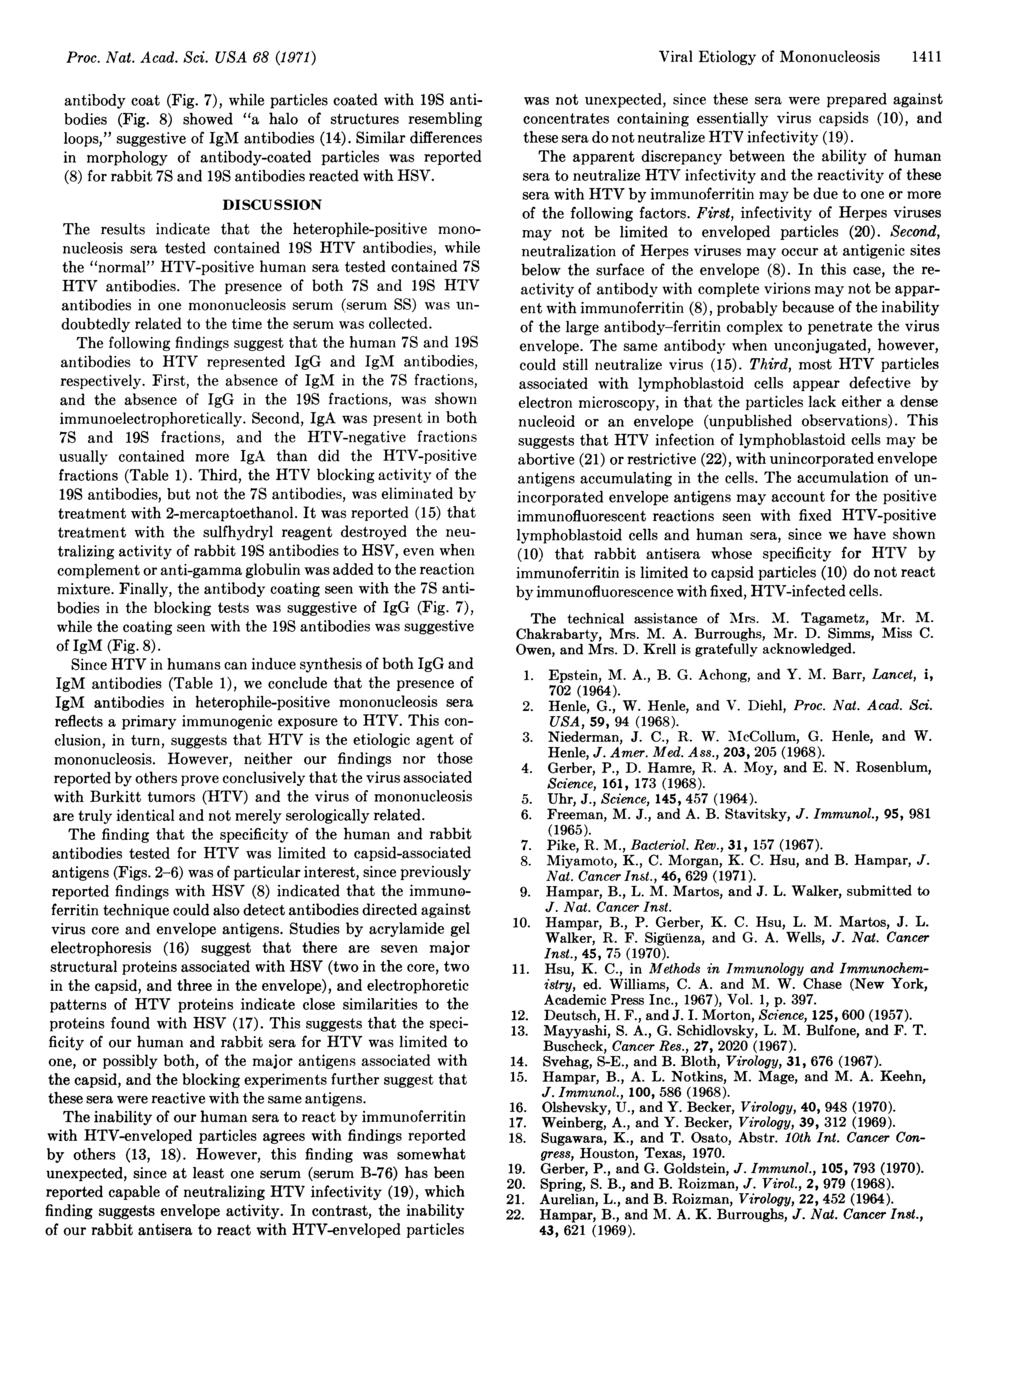 Proc Nat Acad Sci USA 68 (1971) antibody coat (Fig 7), while particles coated with 19S antibodies (Fig 8) showed "a halo of structures resembling loops," suggestive of IgM antibodies (14) Similar